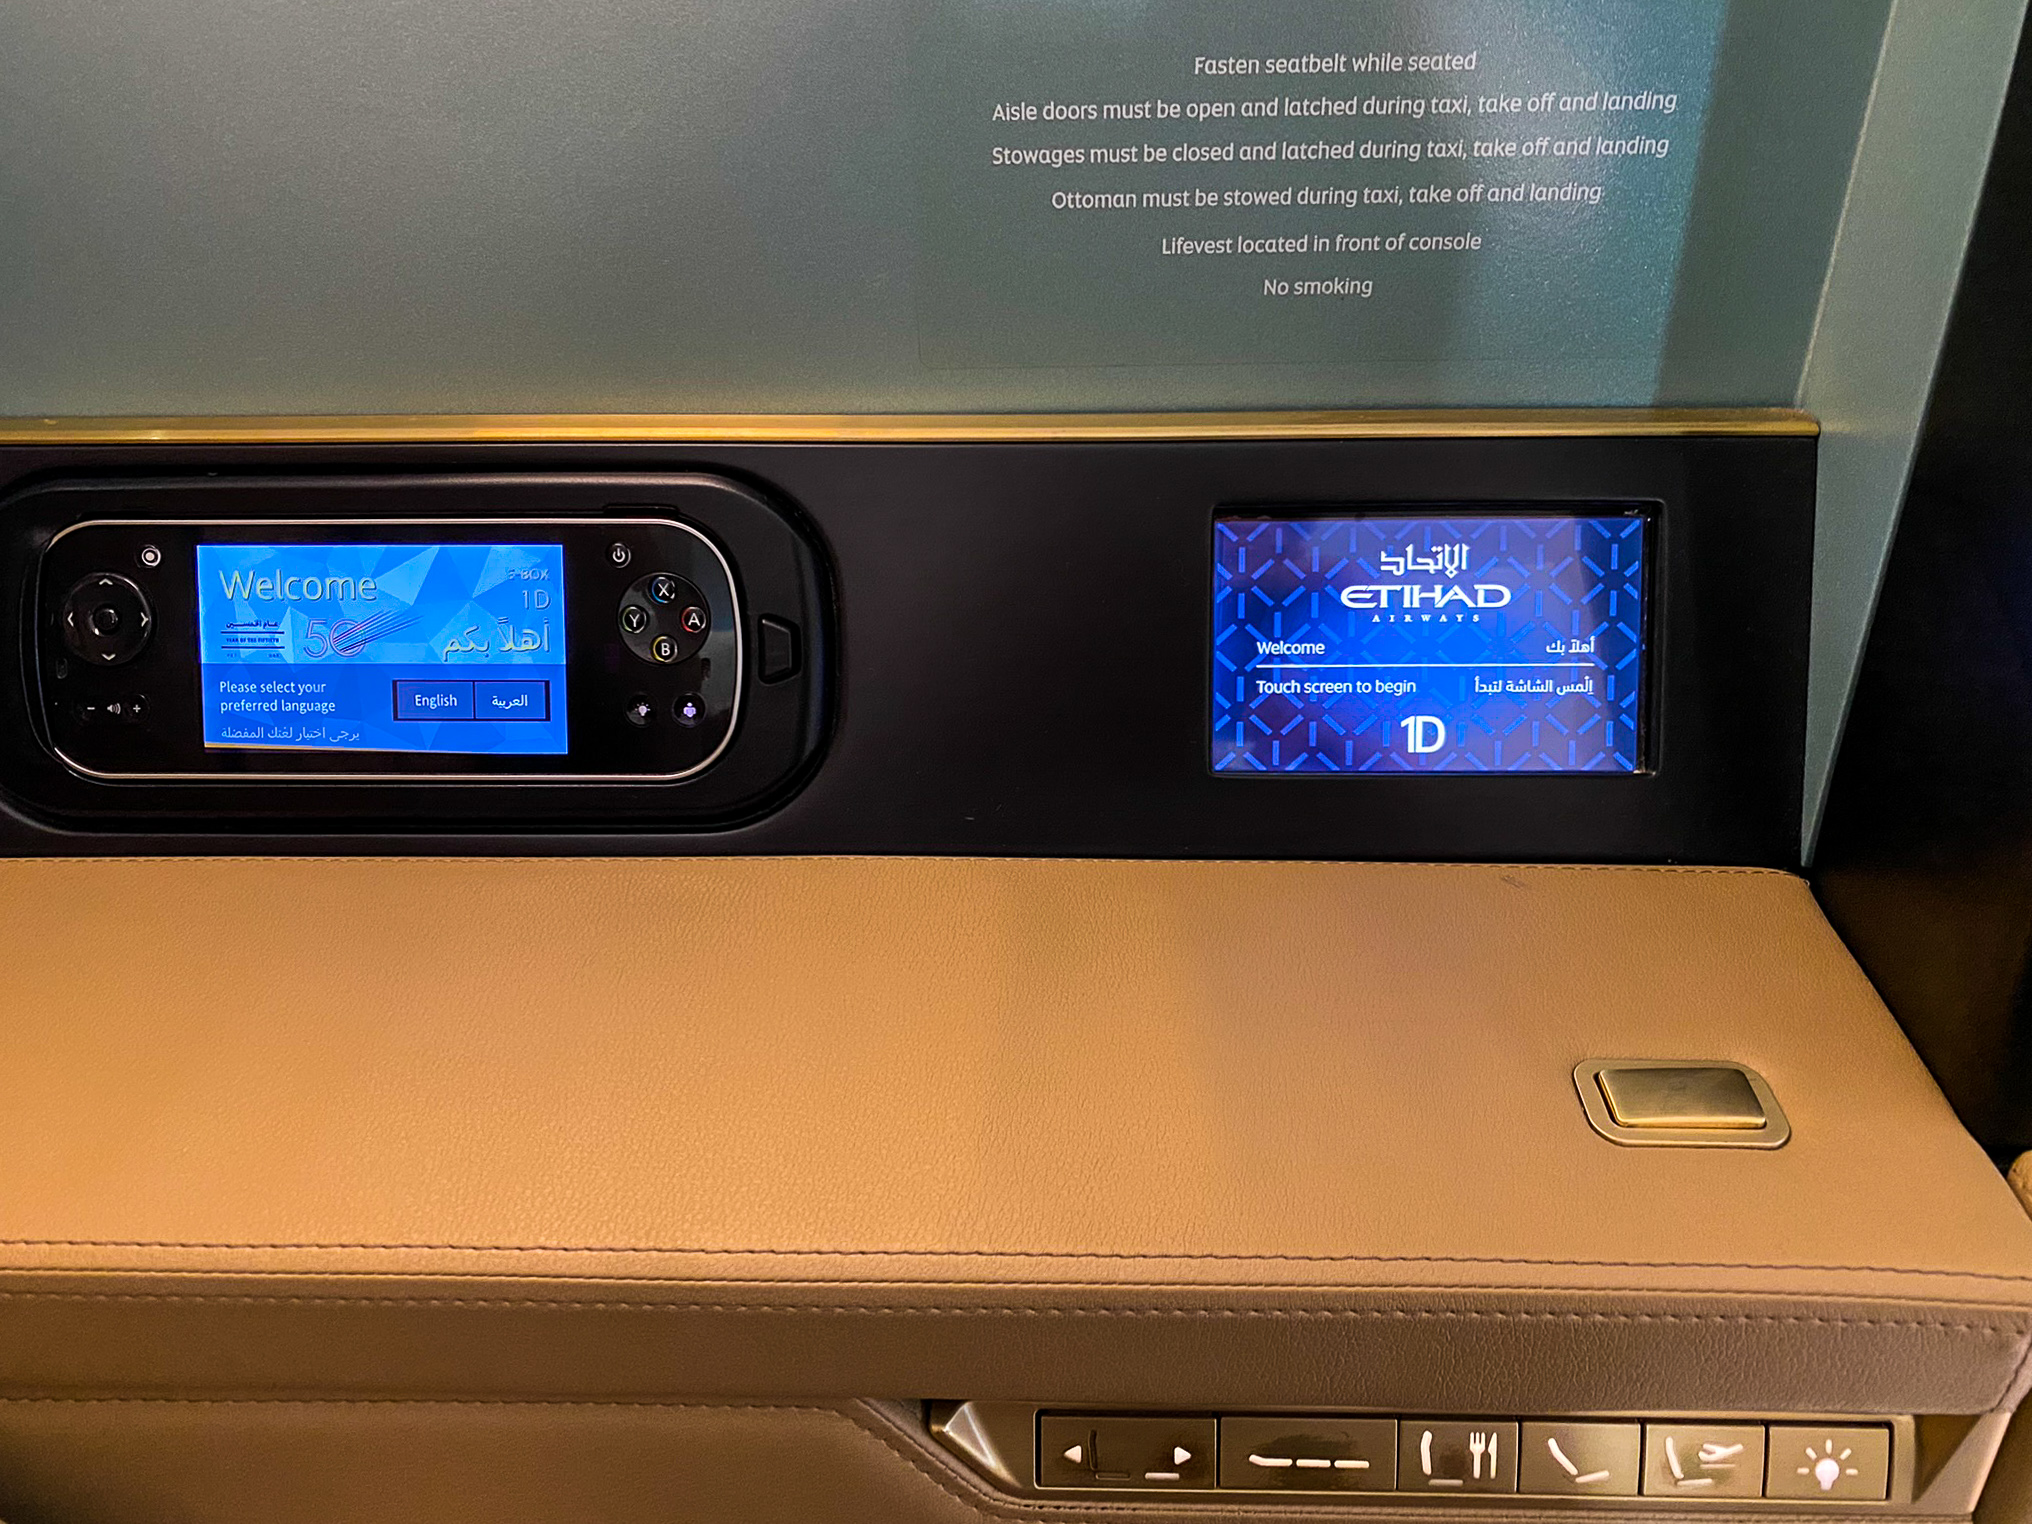 Etihad first class seat controls and touchscreen